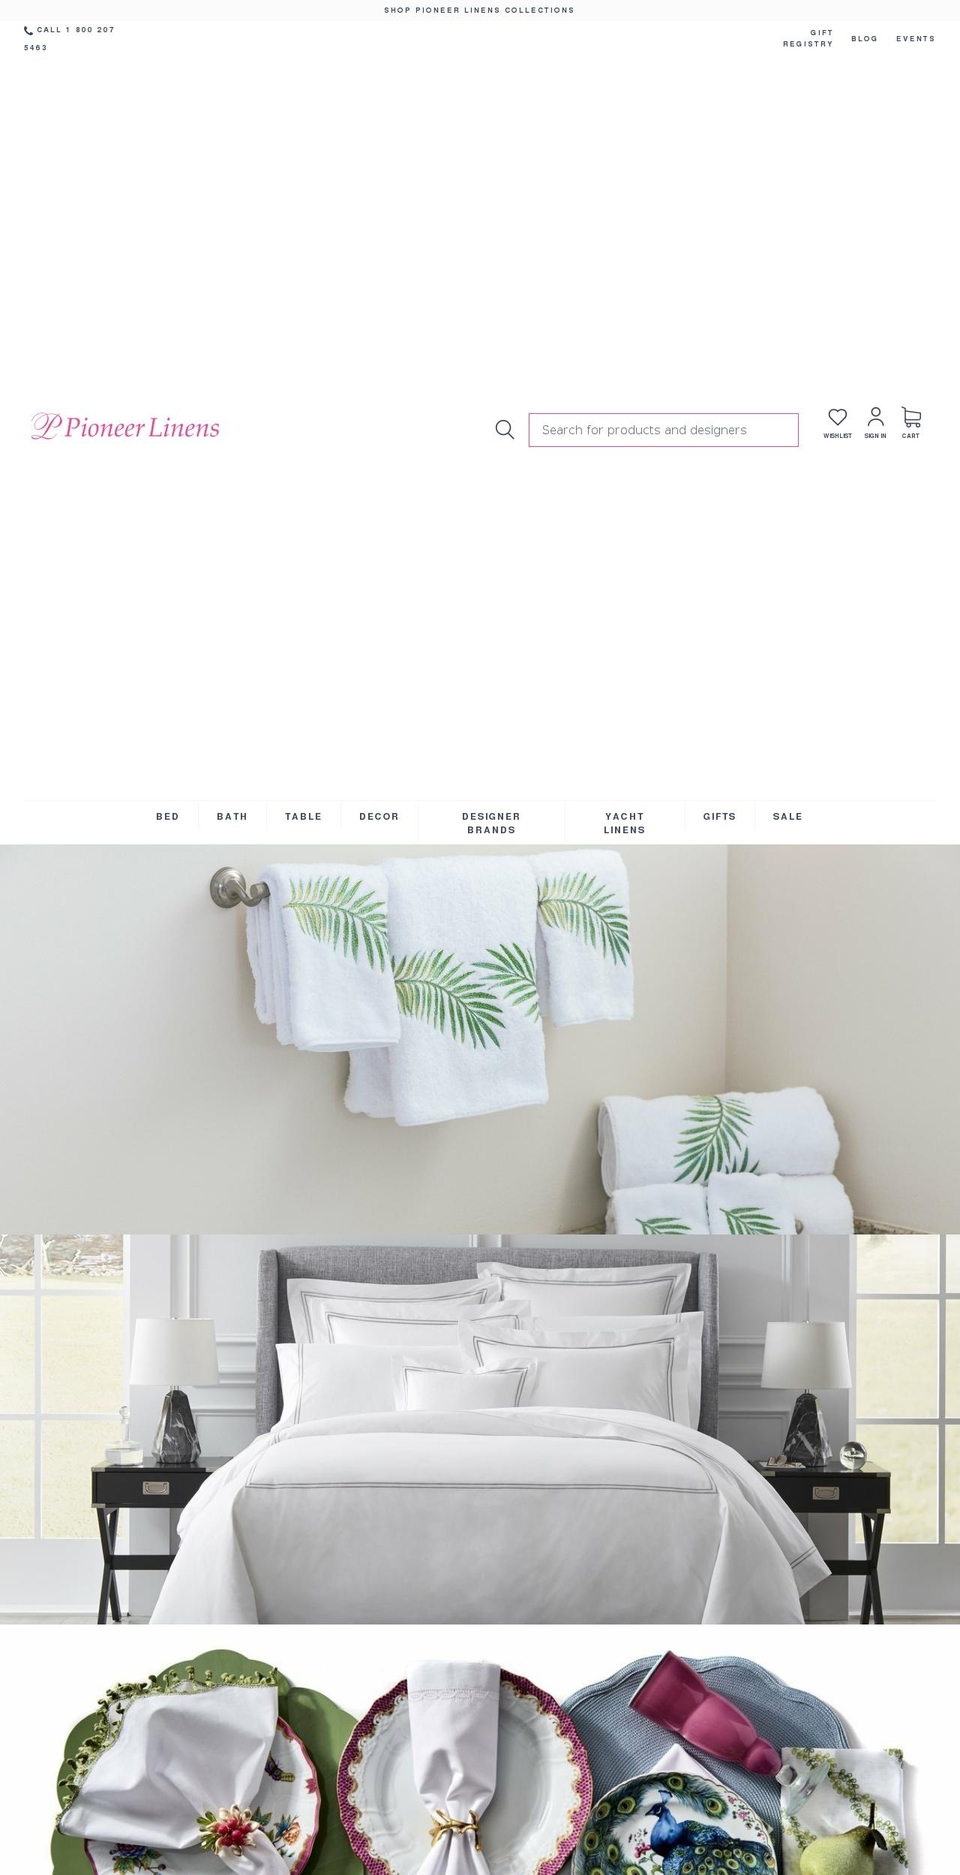 Buko Shopify Theme - Products Consolidation Shopify theme site example v-berthbedding.com